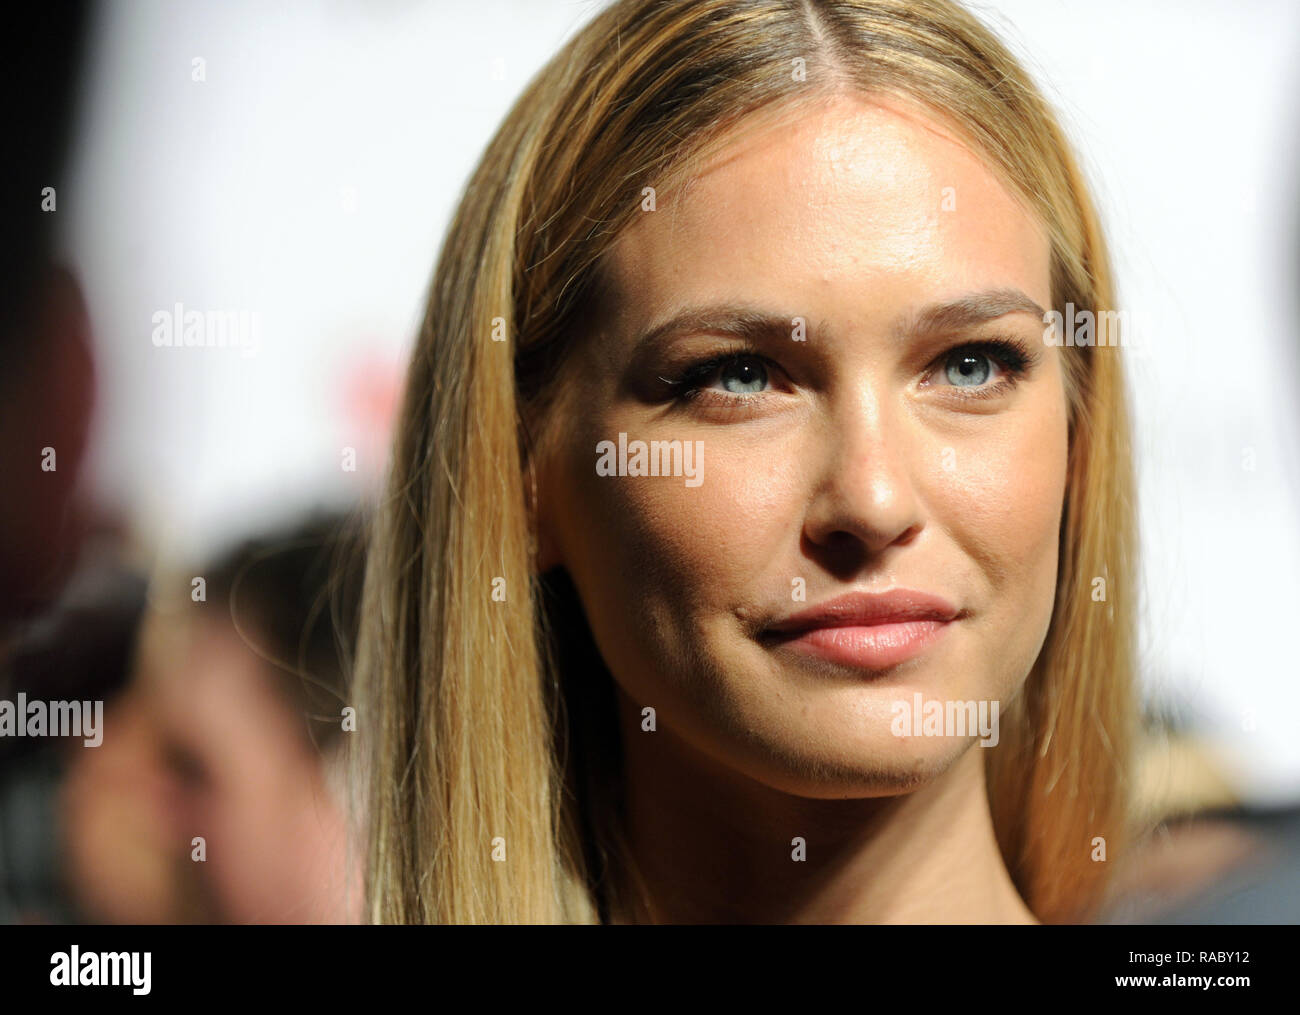 NEW YORK, NY - MAY 24: Bar Refaeli attends the Maxim Hot 100 party at Dream Downtown on May 24, 2012 in New York City.  People:  Bar Refaeli Stock Photo